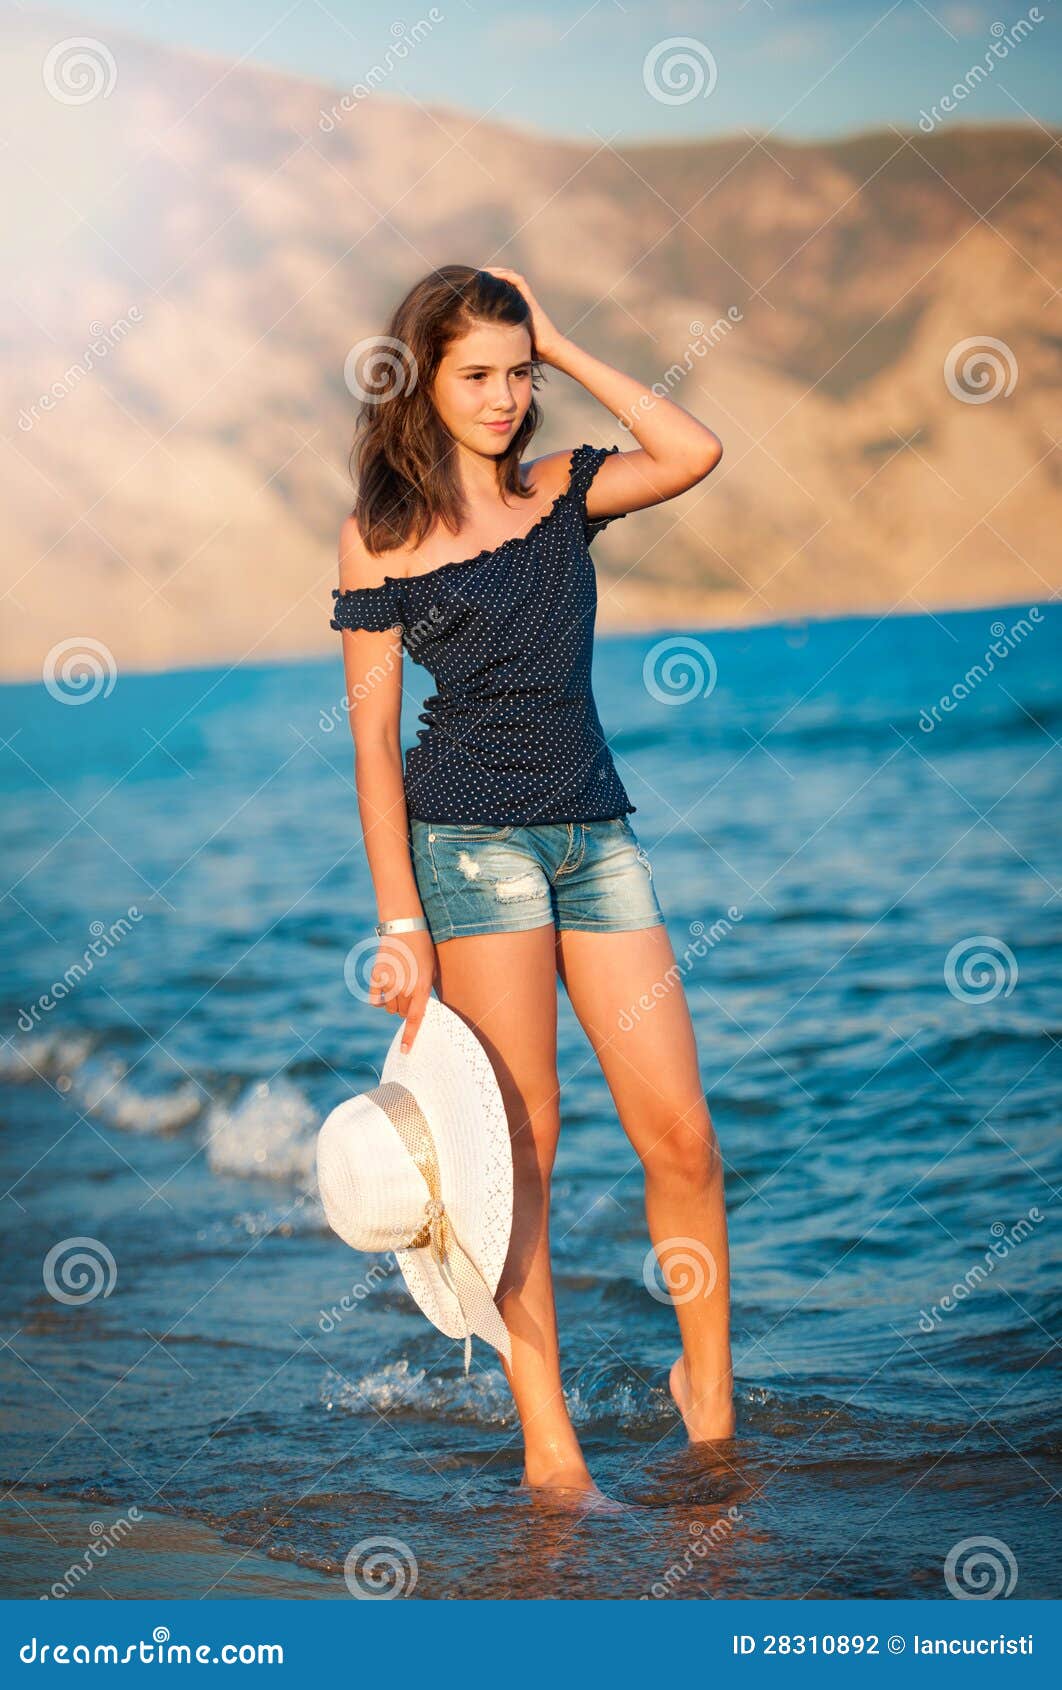 Beautiful Teen Girl Goes On Coast Of Ocean With Straw Hat In Hands